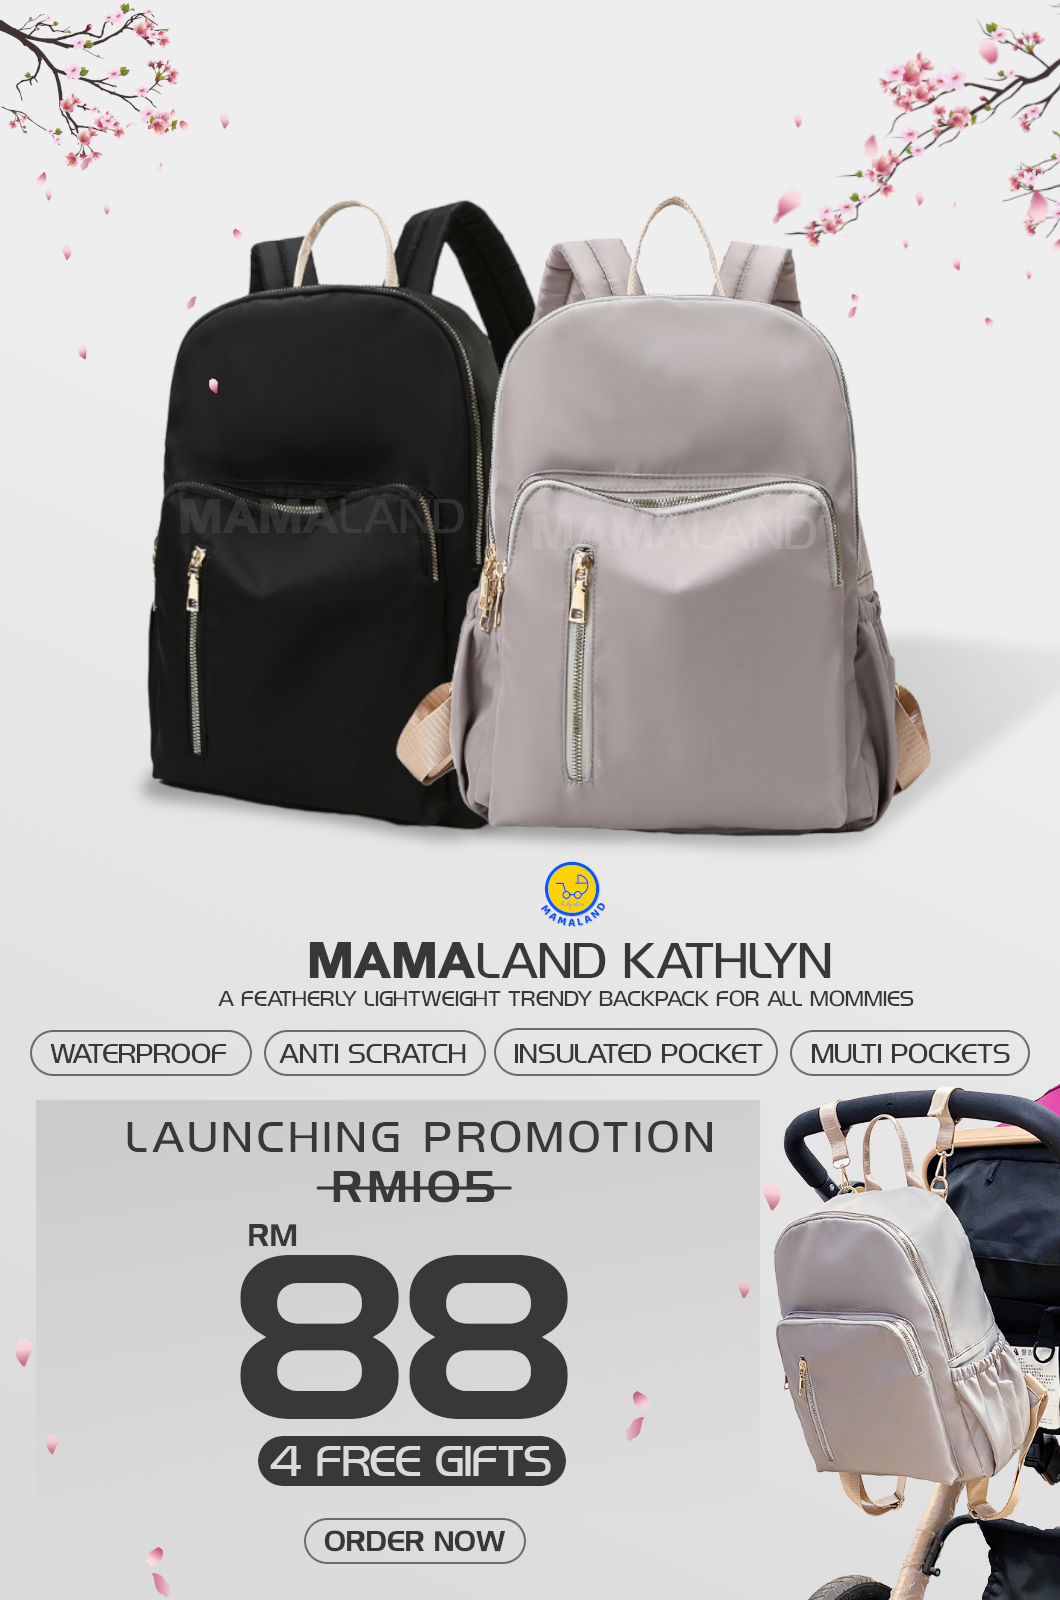 Mamaland Kathlyn mommy backpack.png